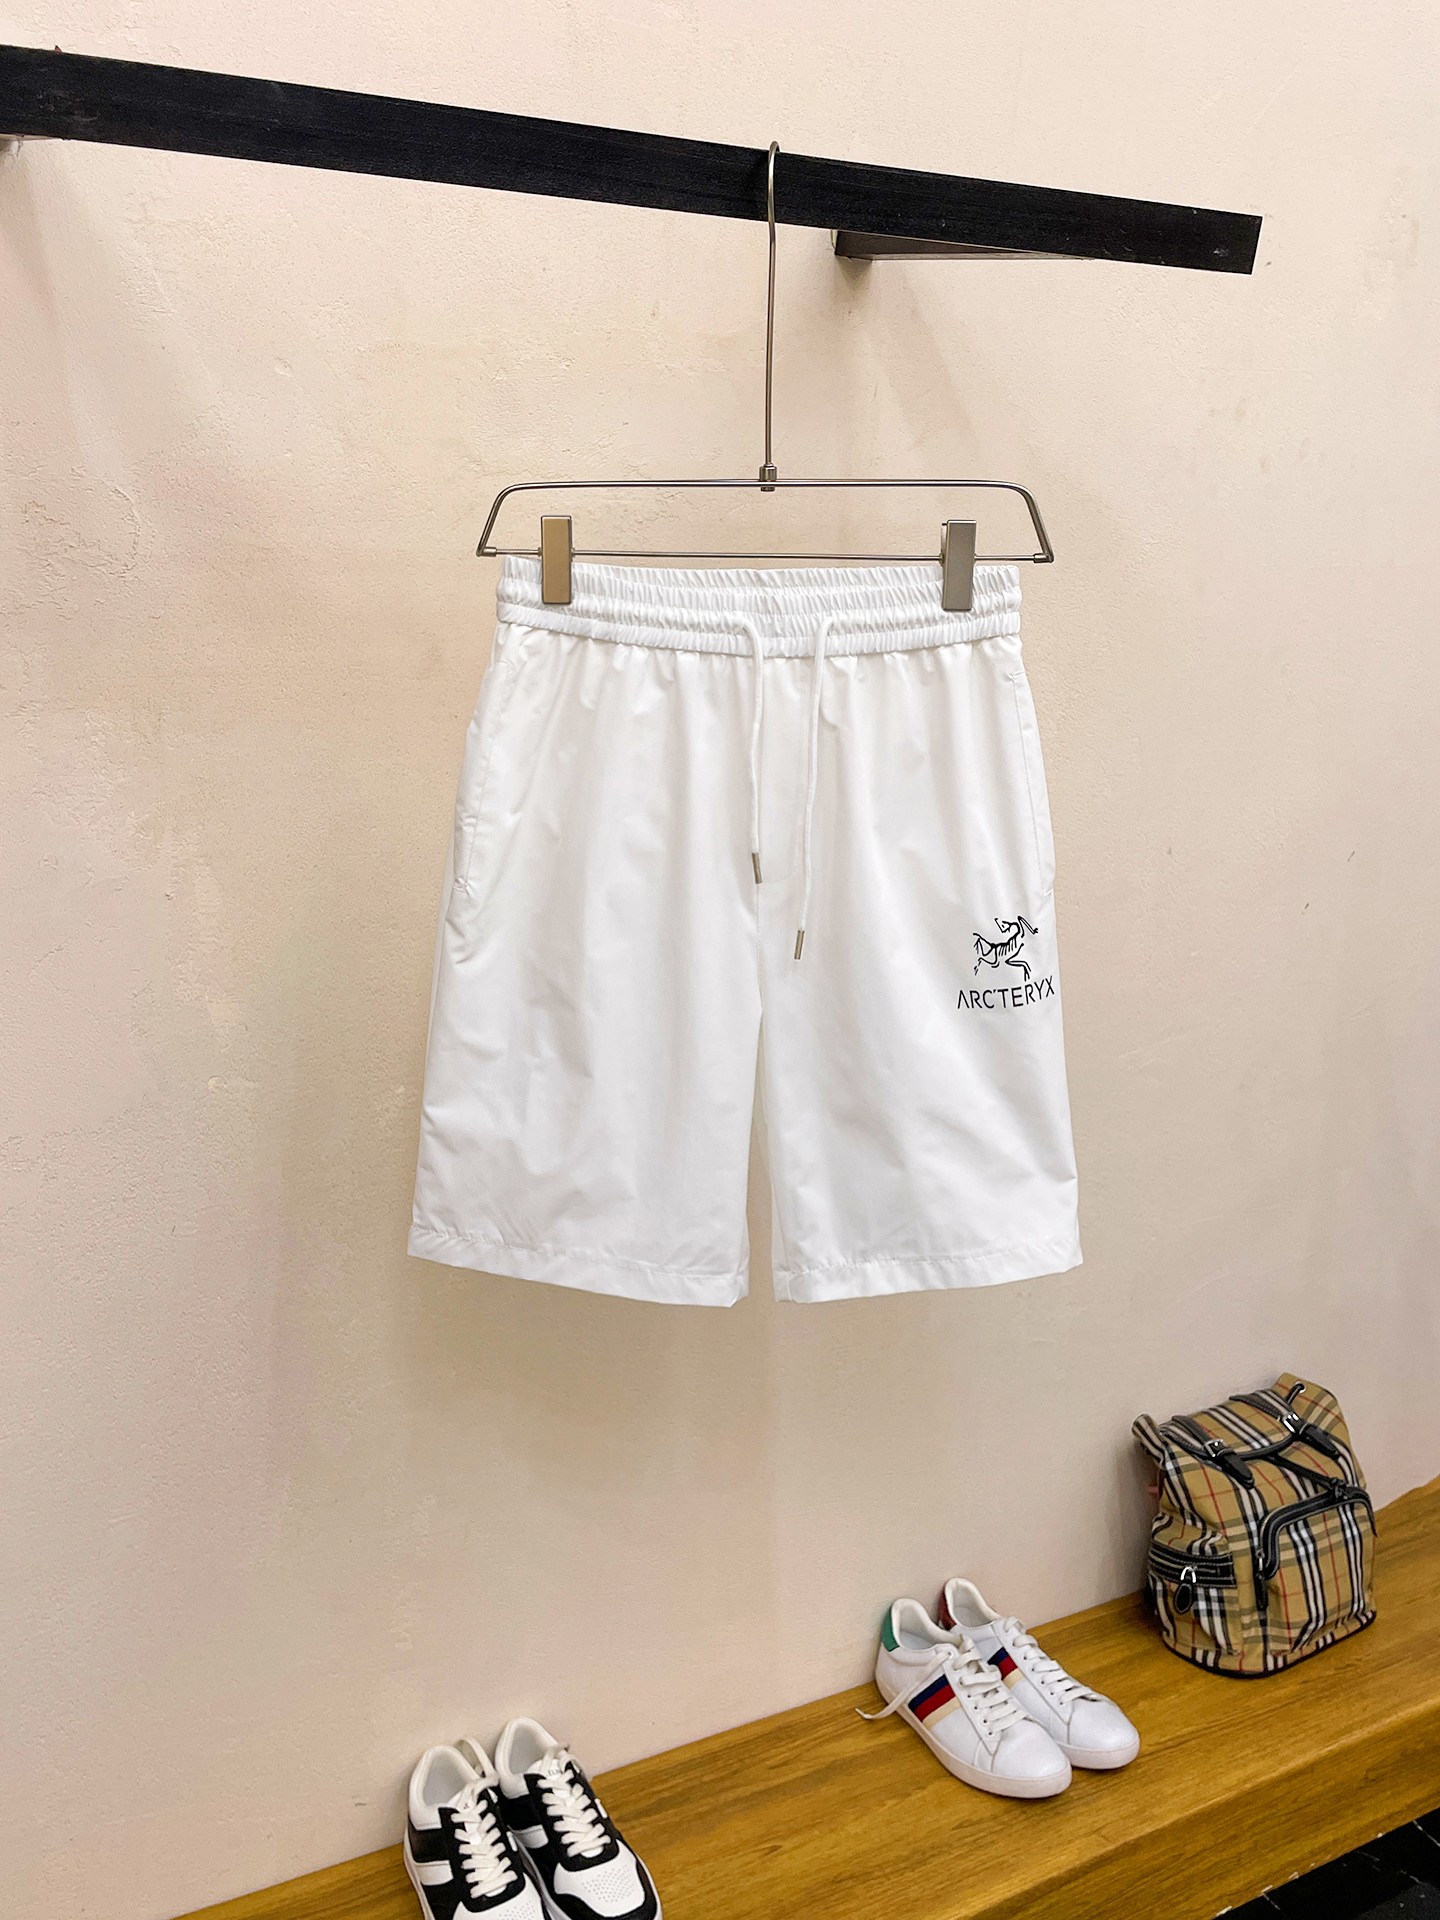 Arc’teryx Clothing Shorts Cotton Summer Collection Casual